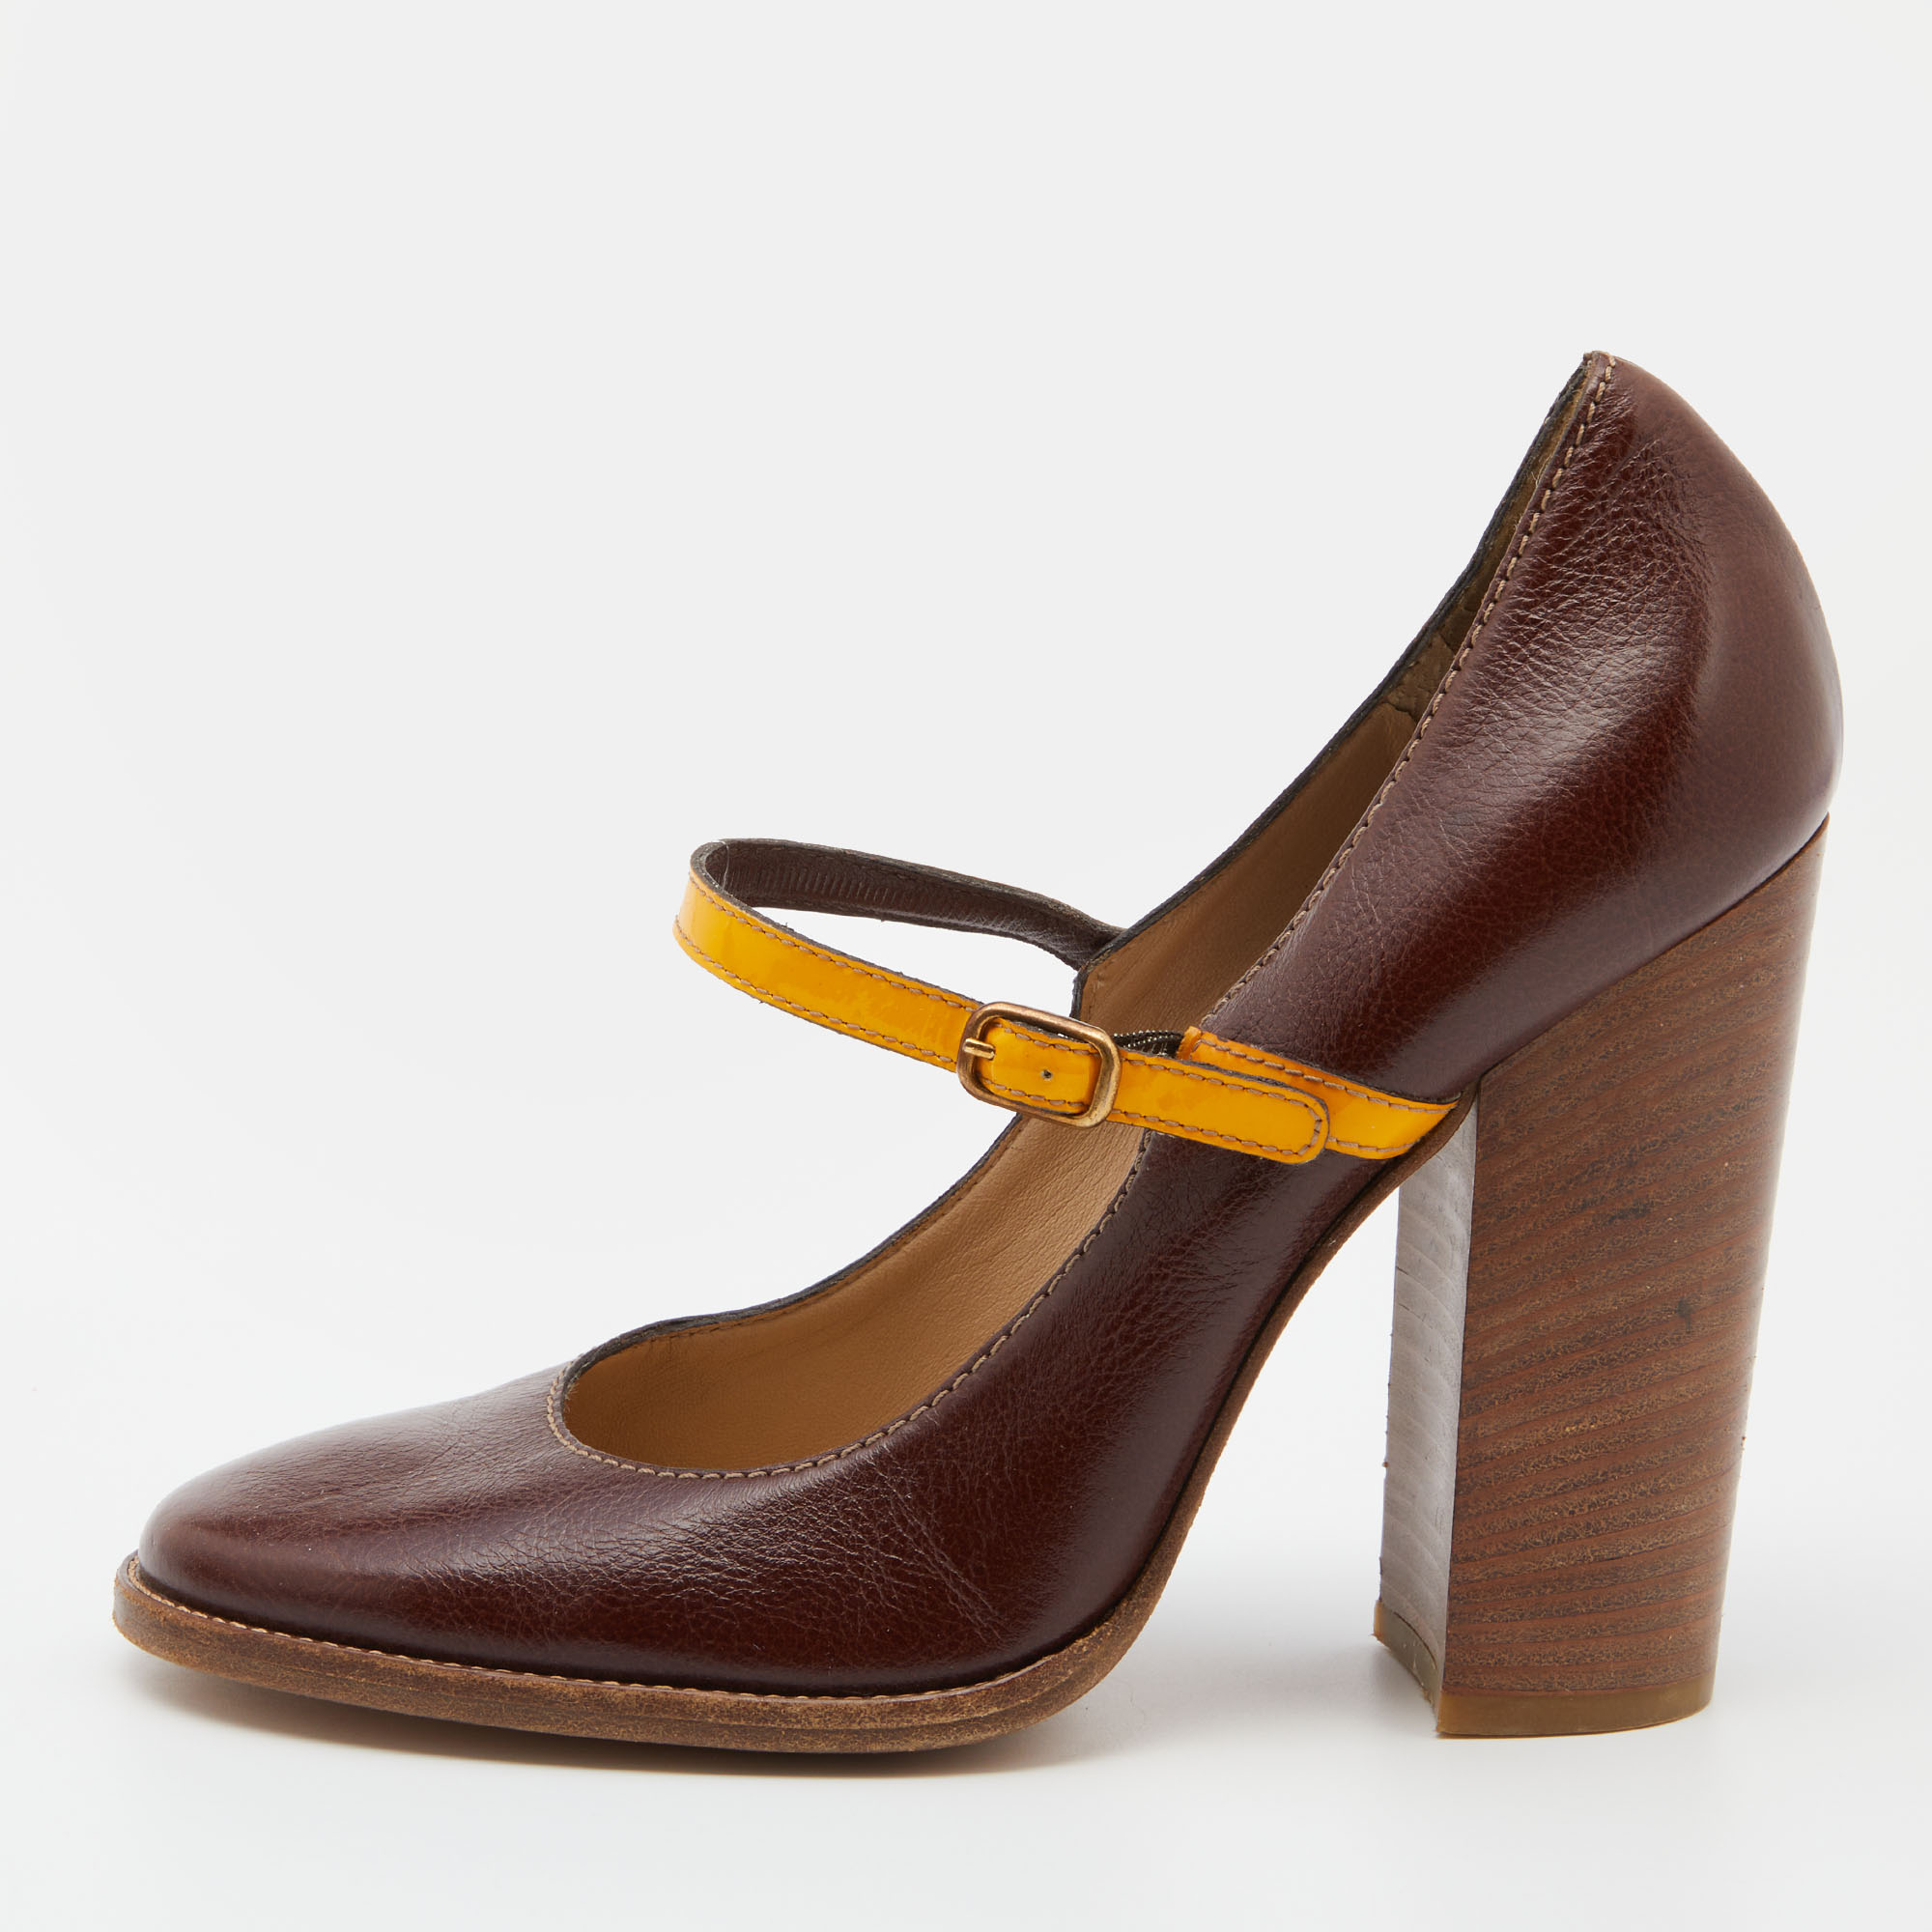 D&G Brown/Yellow Patent And Leather Block Heel Pumps Size 40